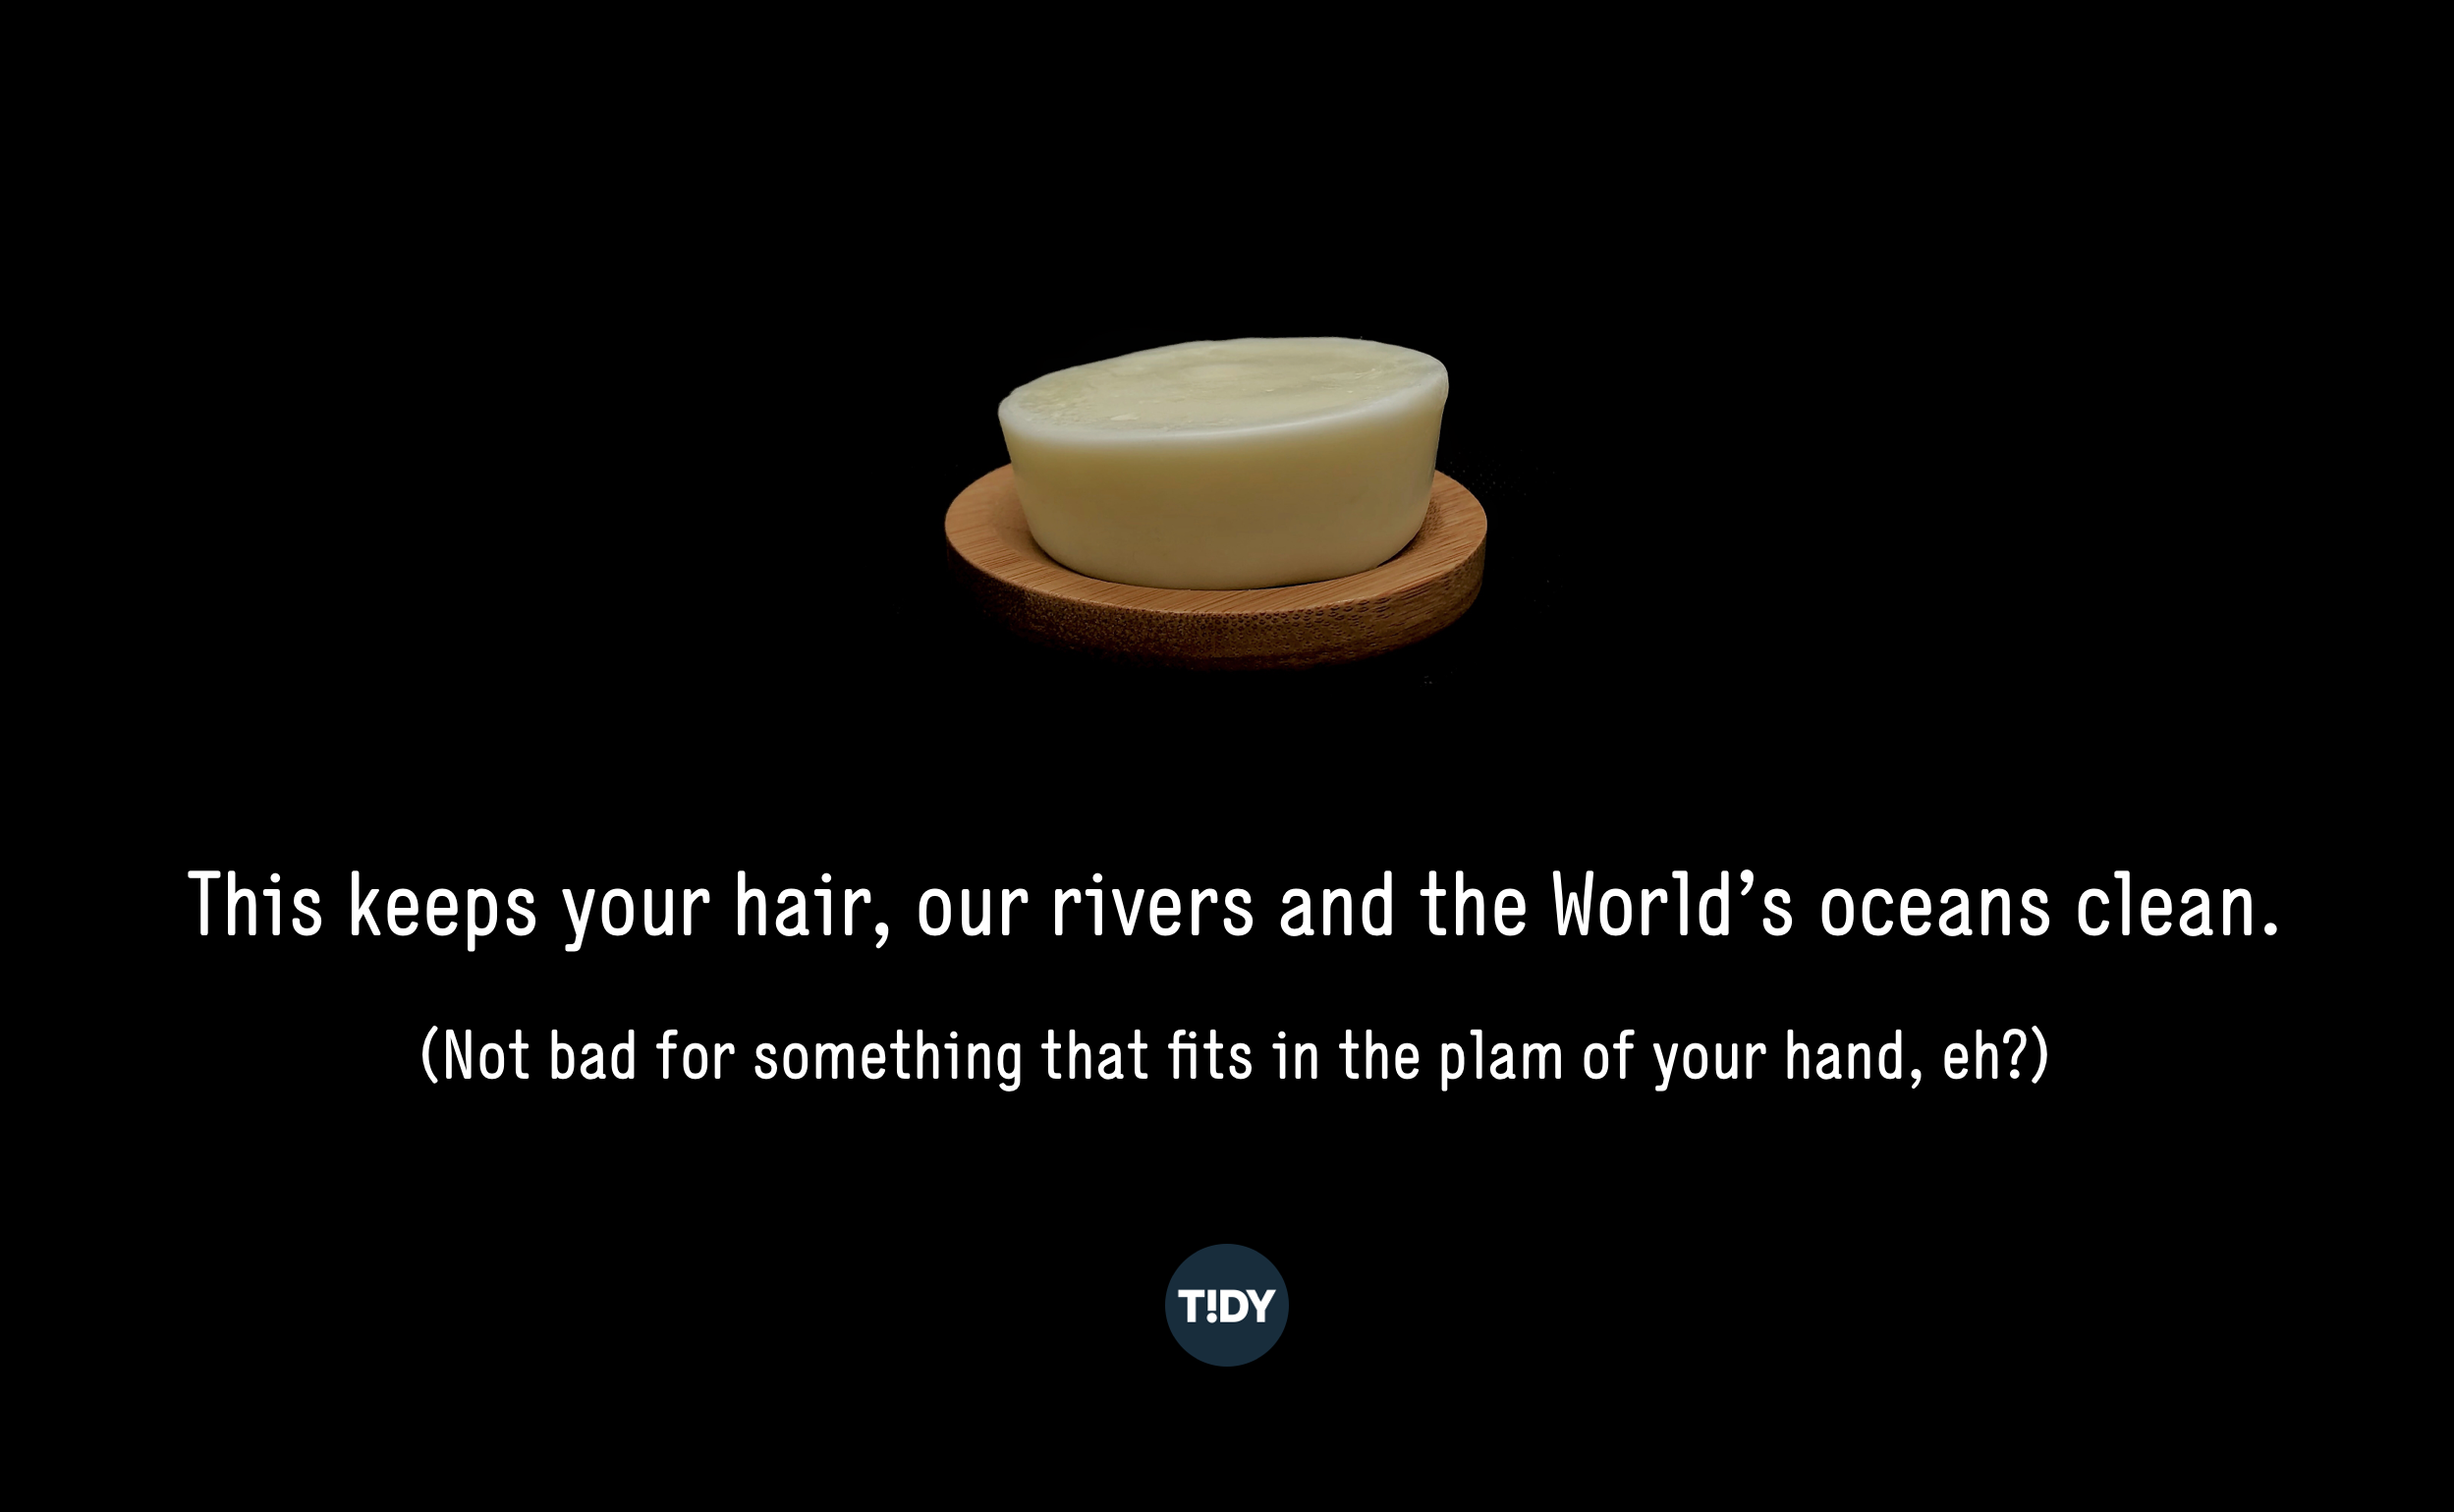 Copy reads: "This keeps your hair, our rivers and the World's oceans clean. Not bad for something that fits in the palm of your hand, eh?" Below a photo of a Tidy solid shampoo bar for men in a soap dish